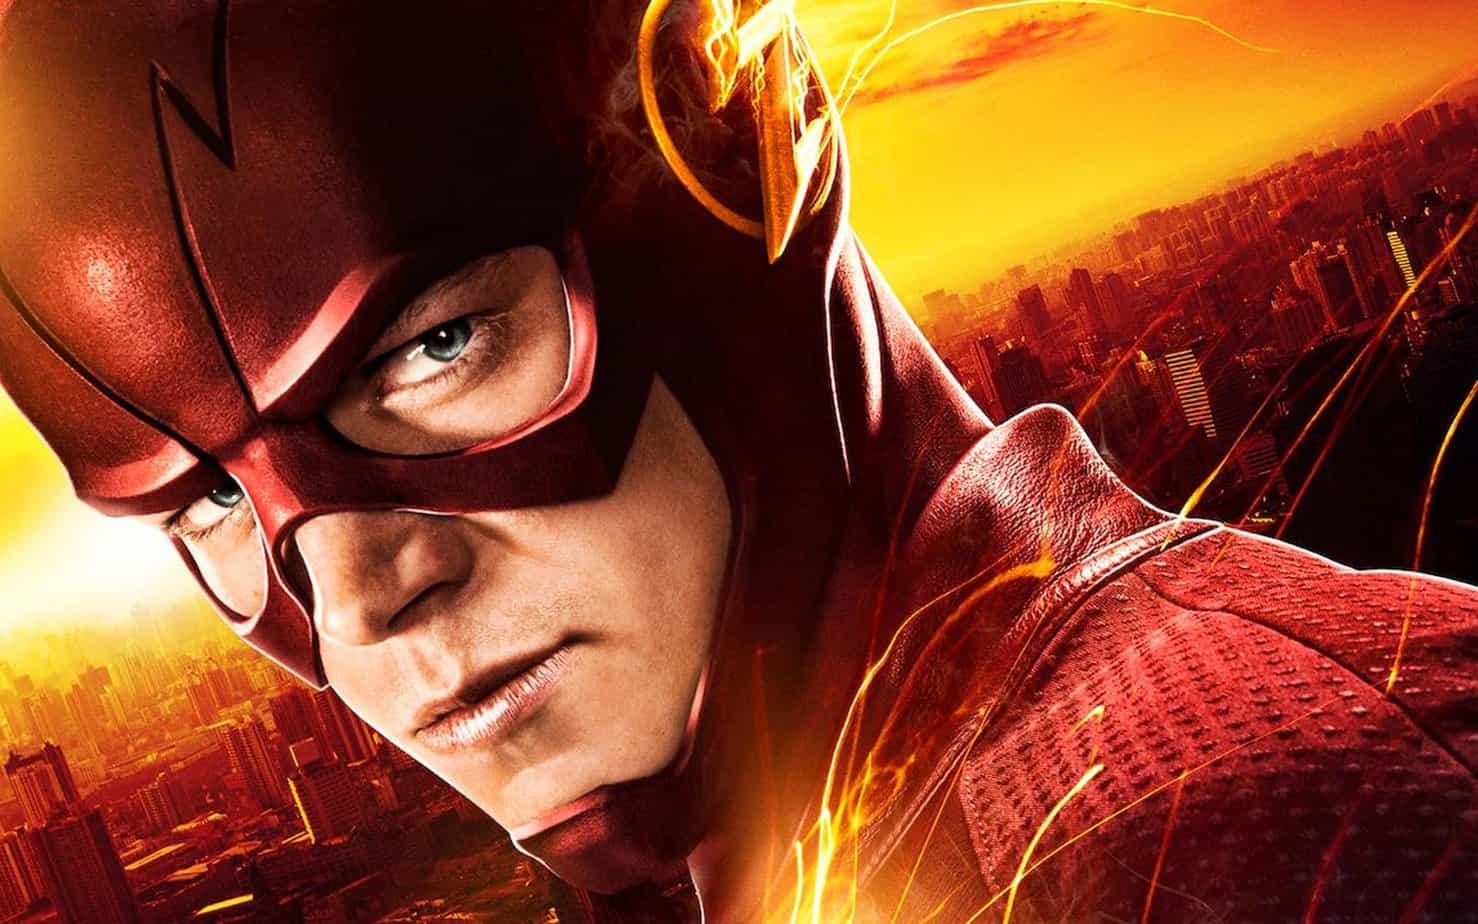 THE FLASH IS DELAYED - Production is halted until further notice due to COVID concerns